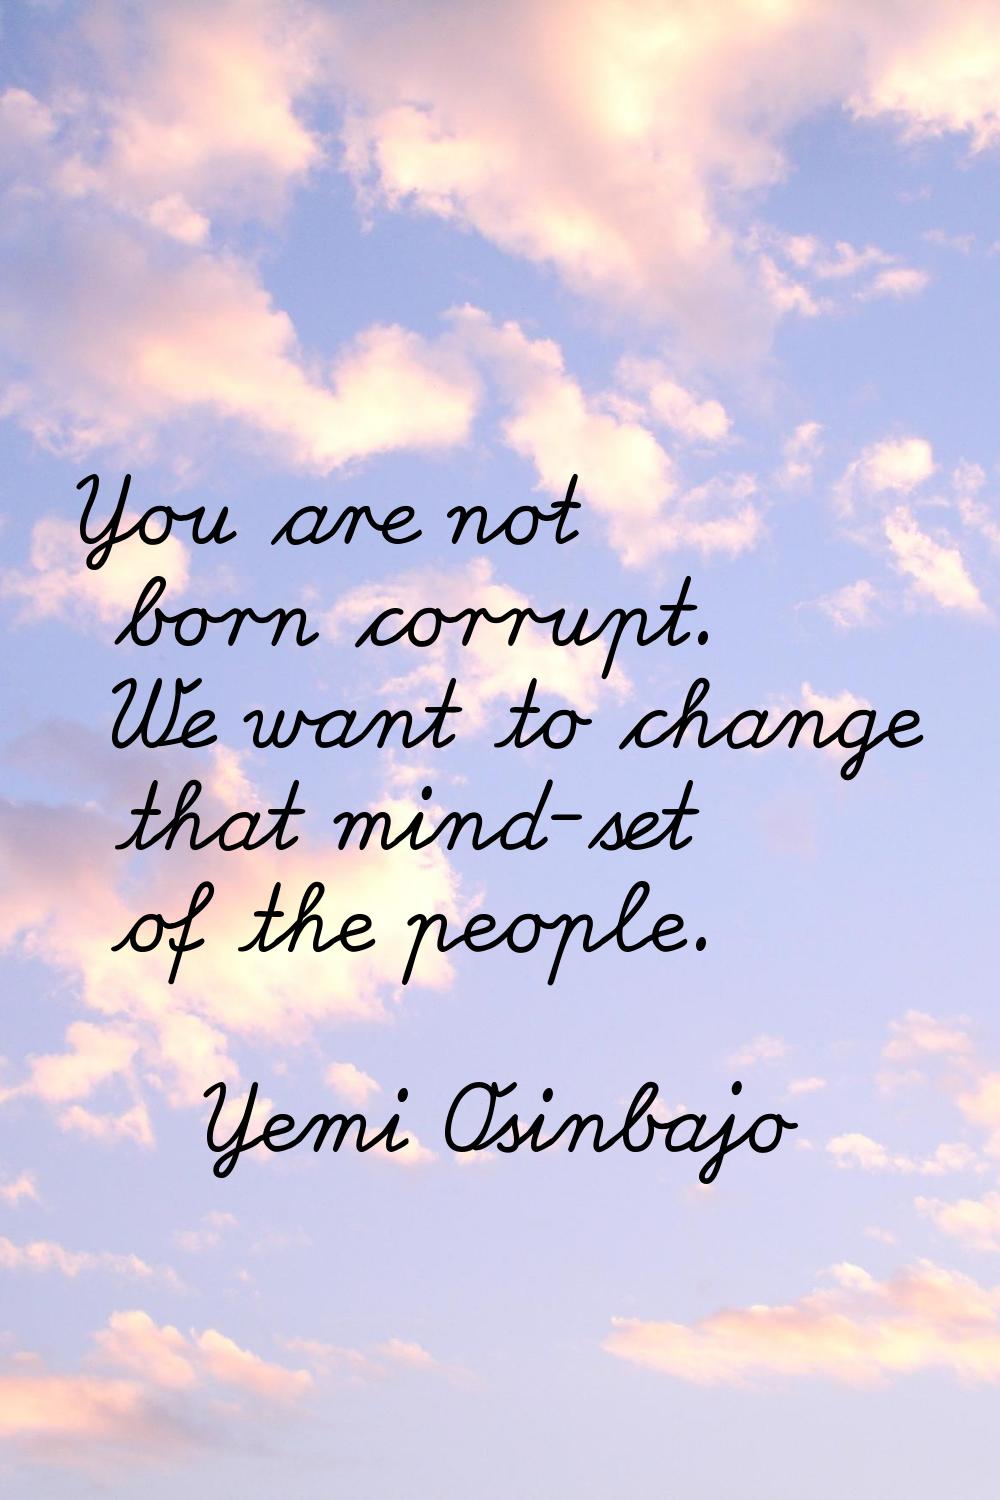 You are not born corrupt. We want to change that mind-set of the people.